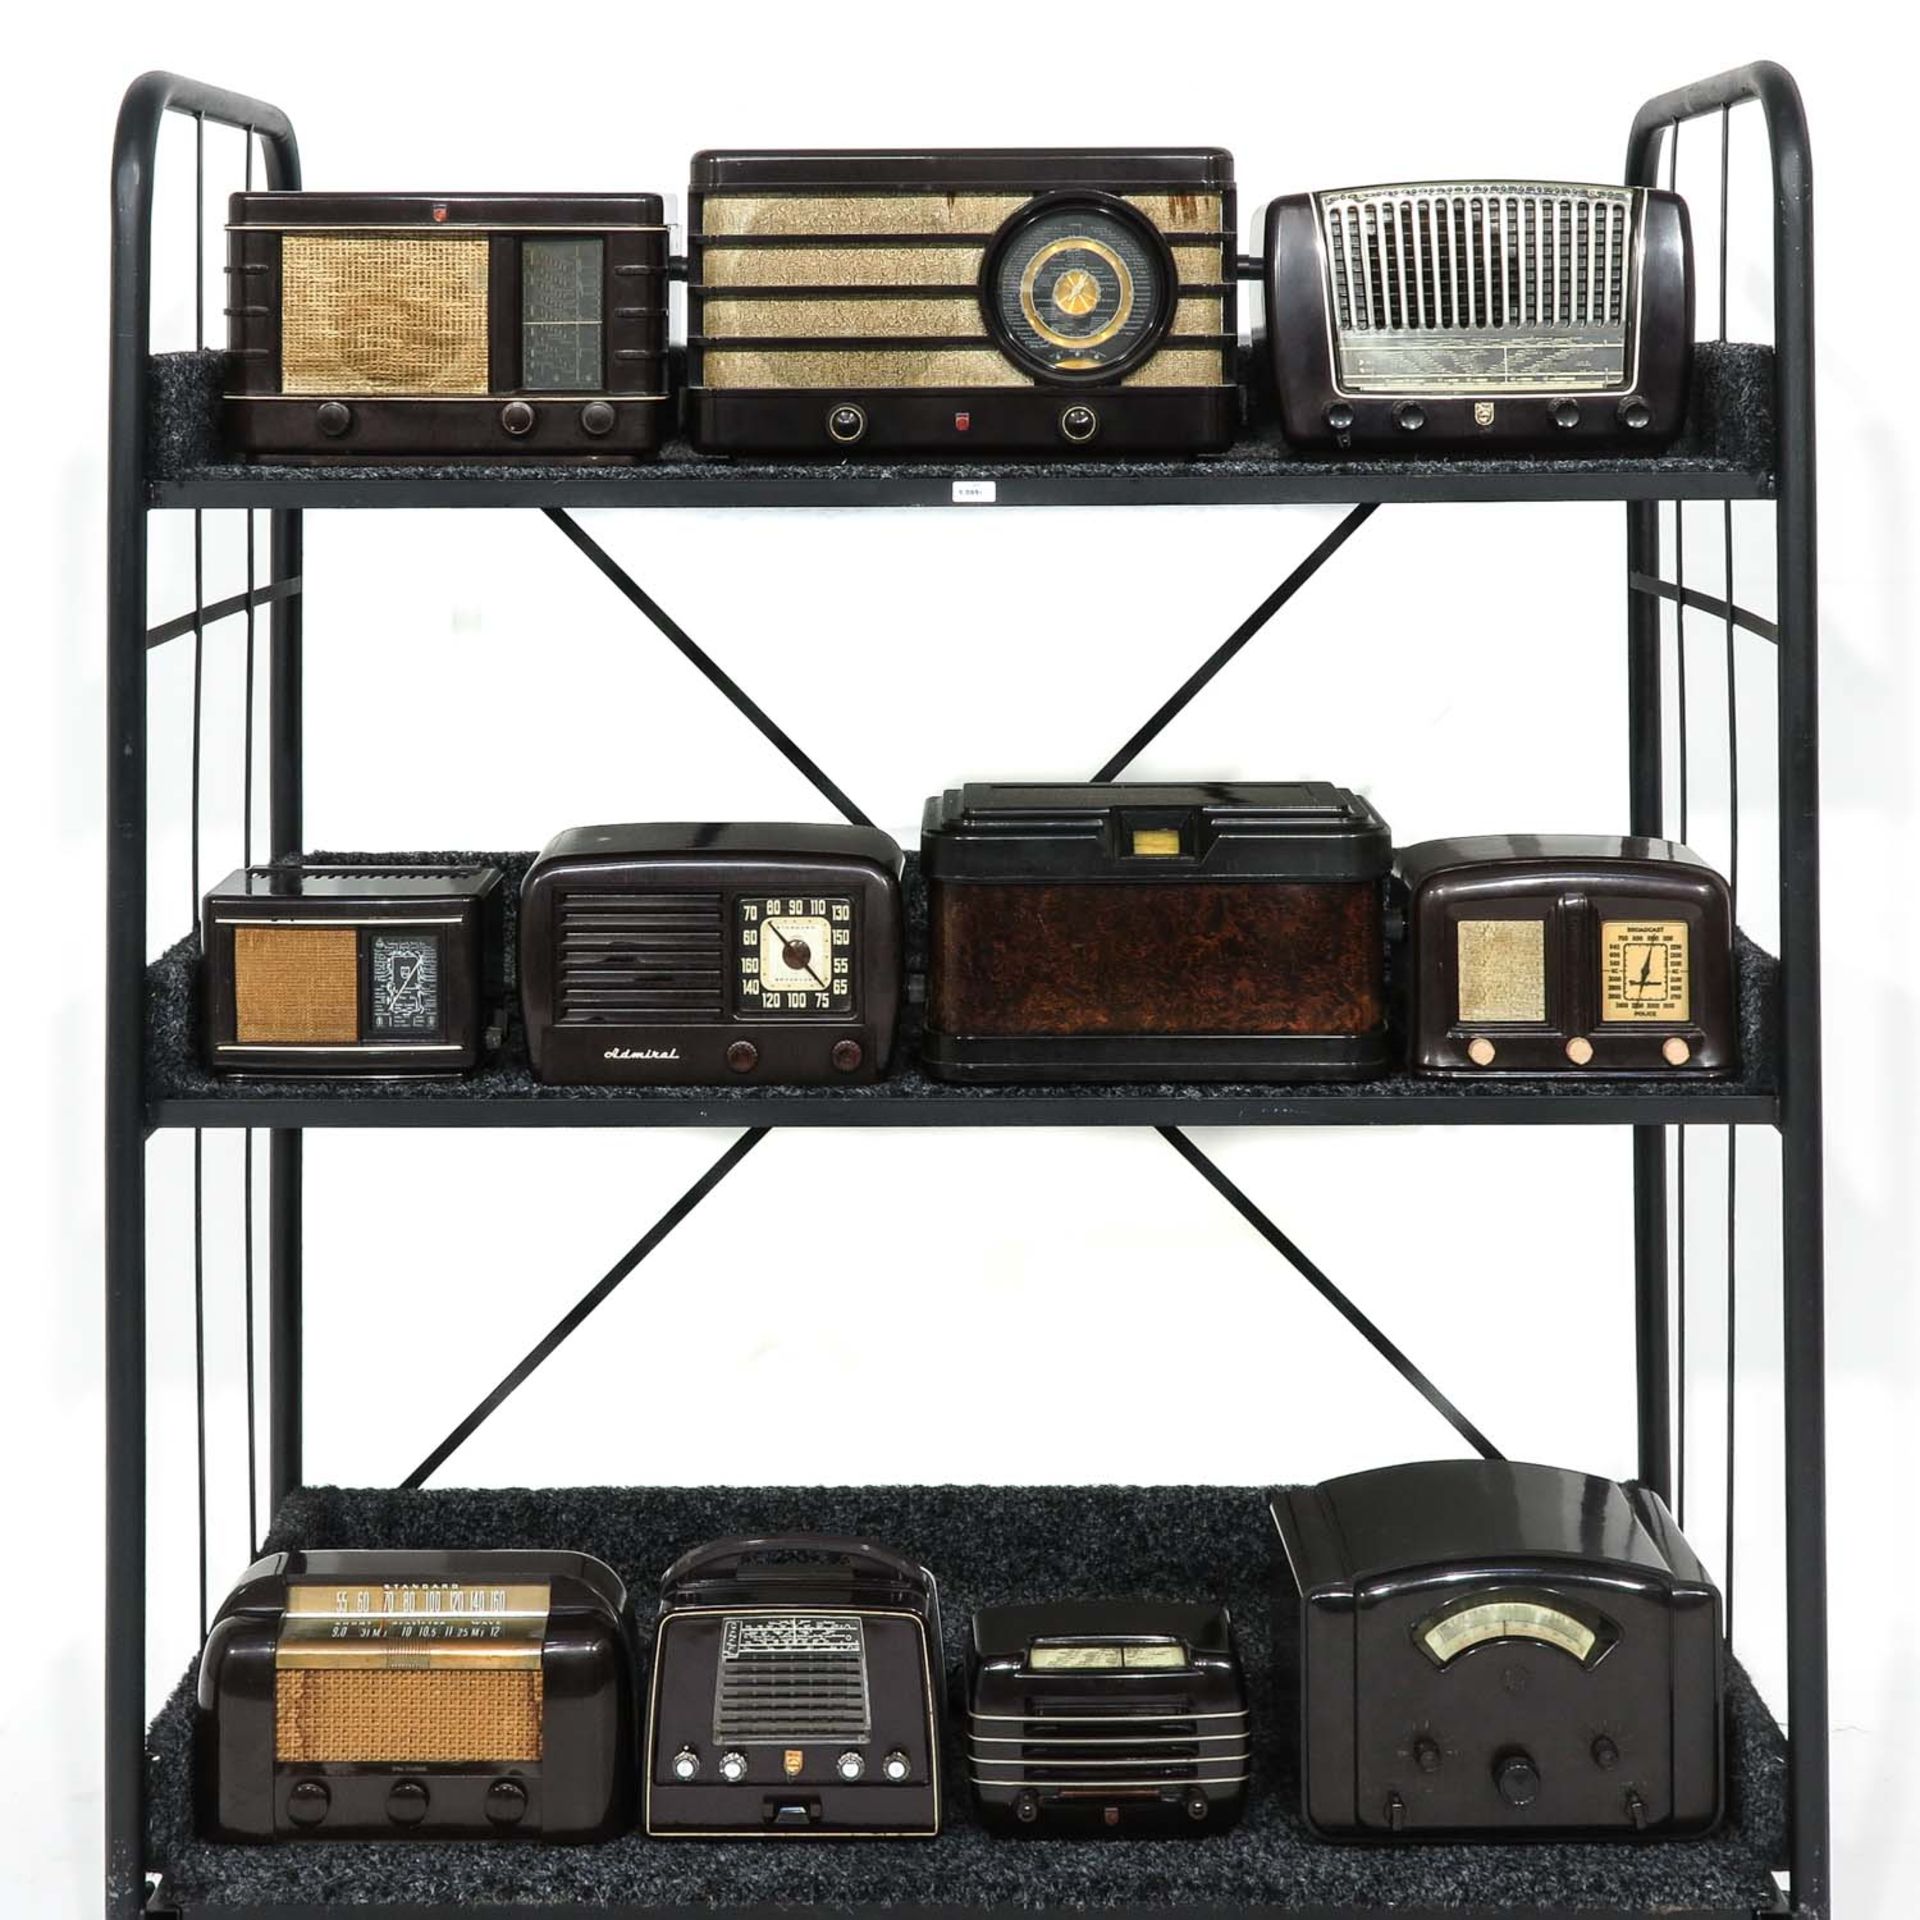 A Collection of 11 Vintage Radios